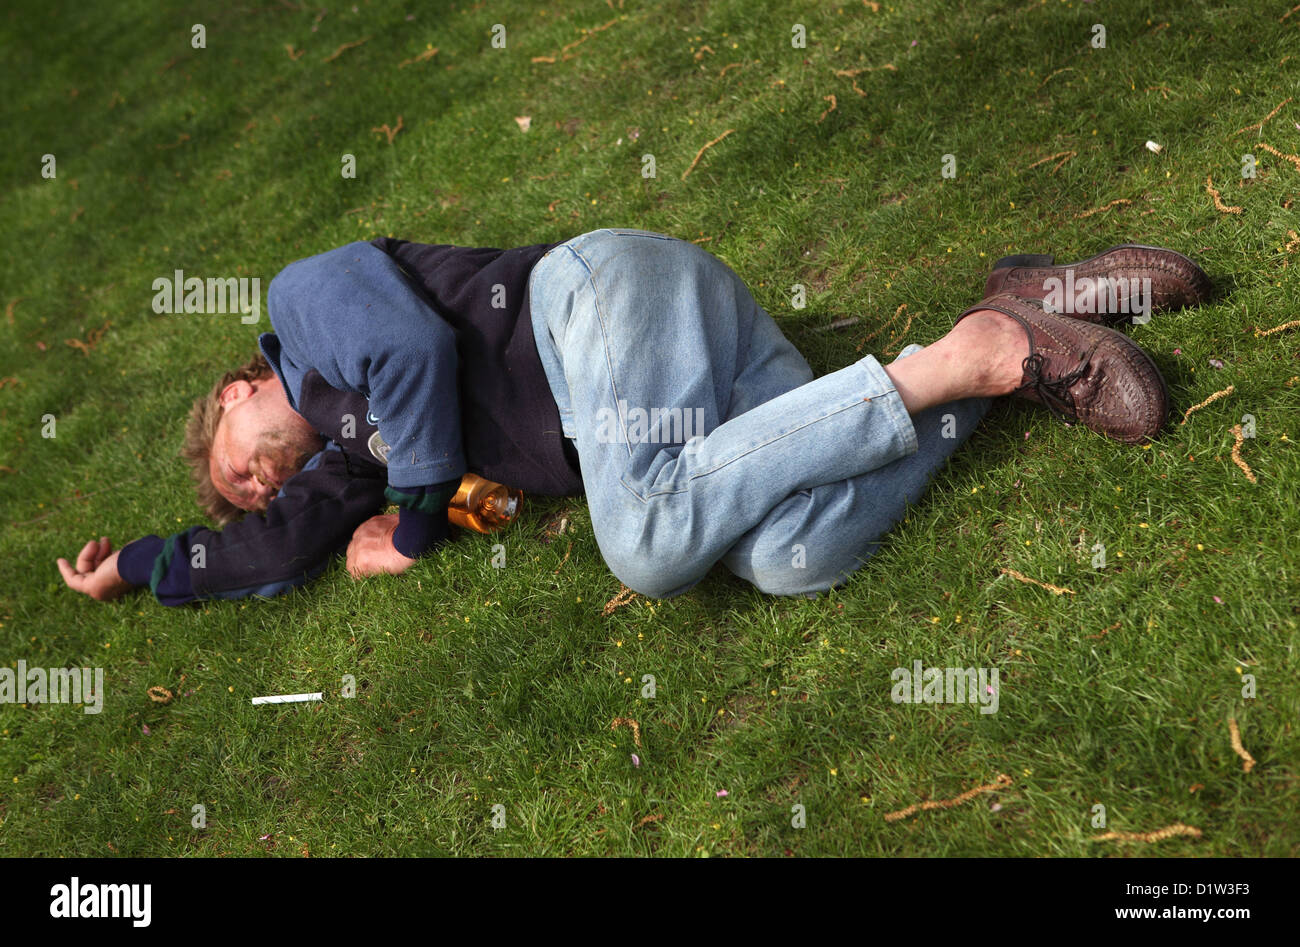 Budapest, Hungary, symbol poverty. A man is sleeping on the grass Stock Photo